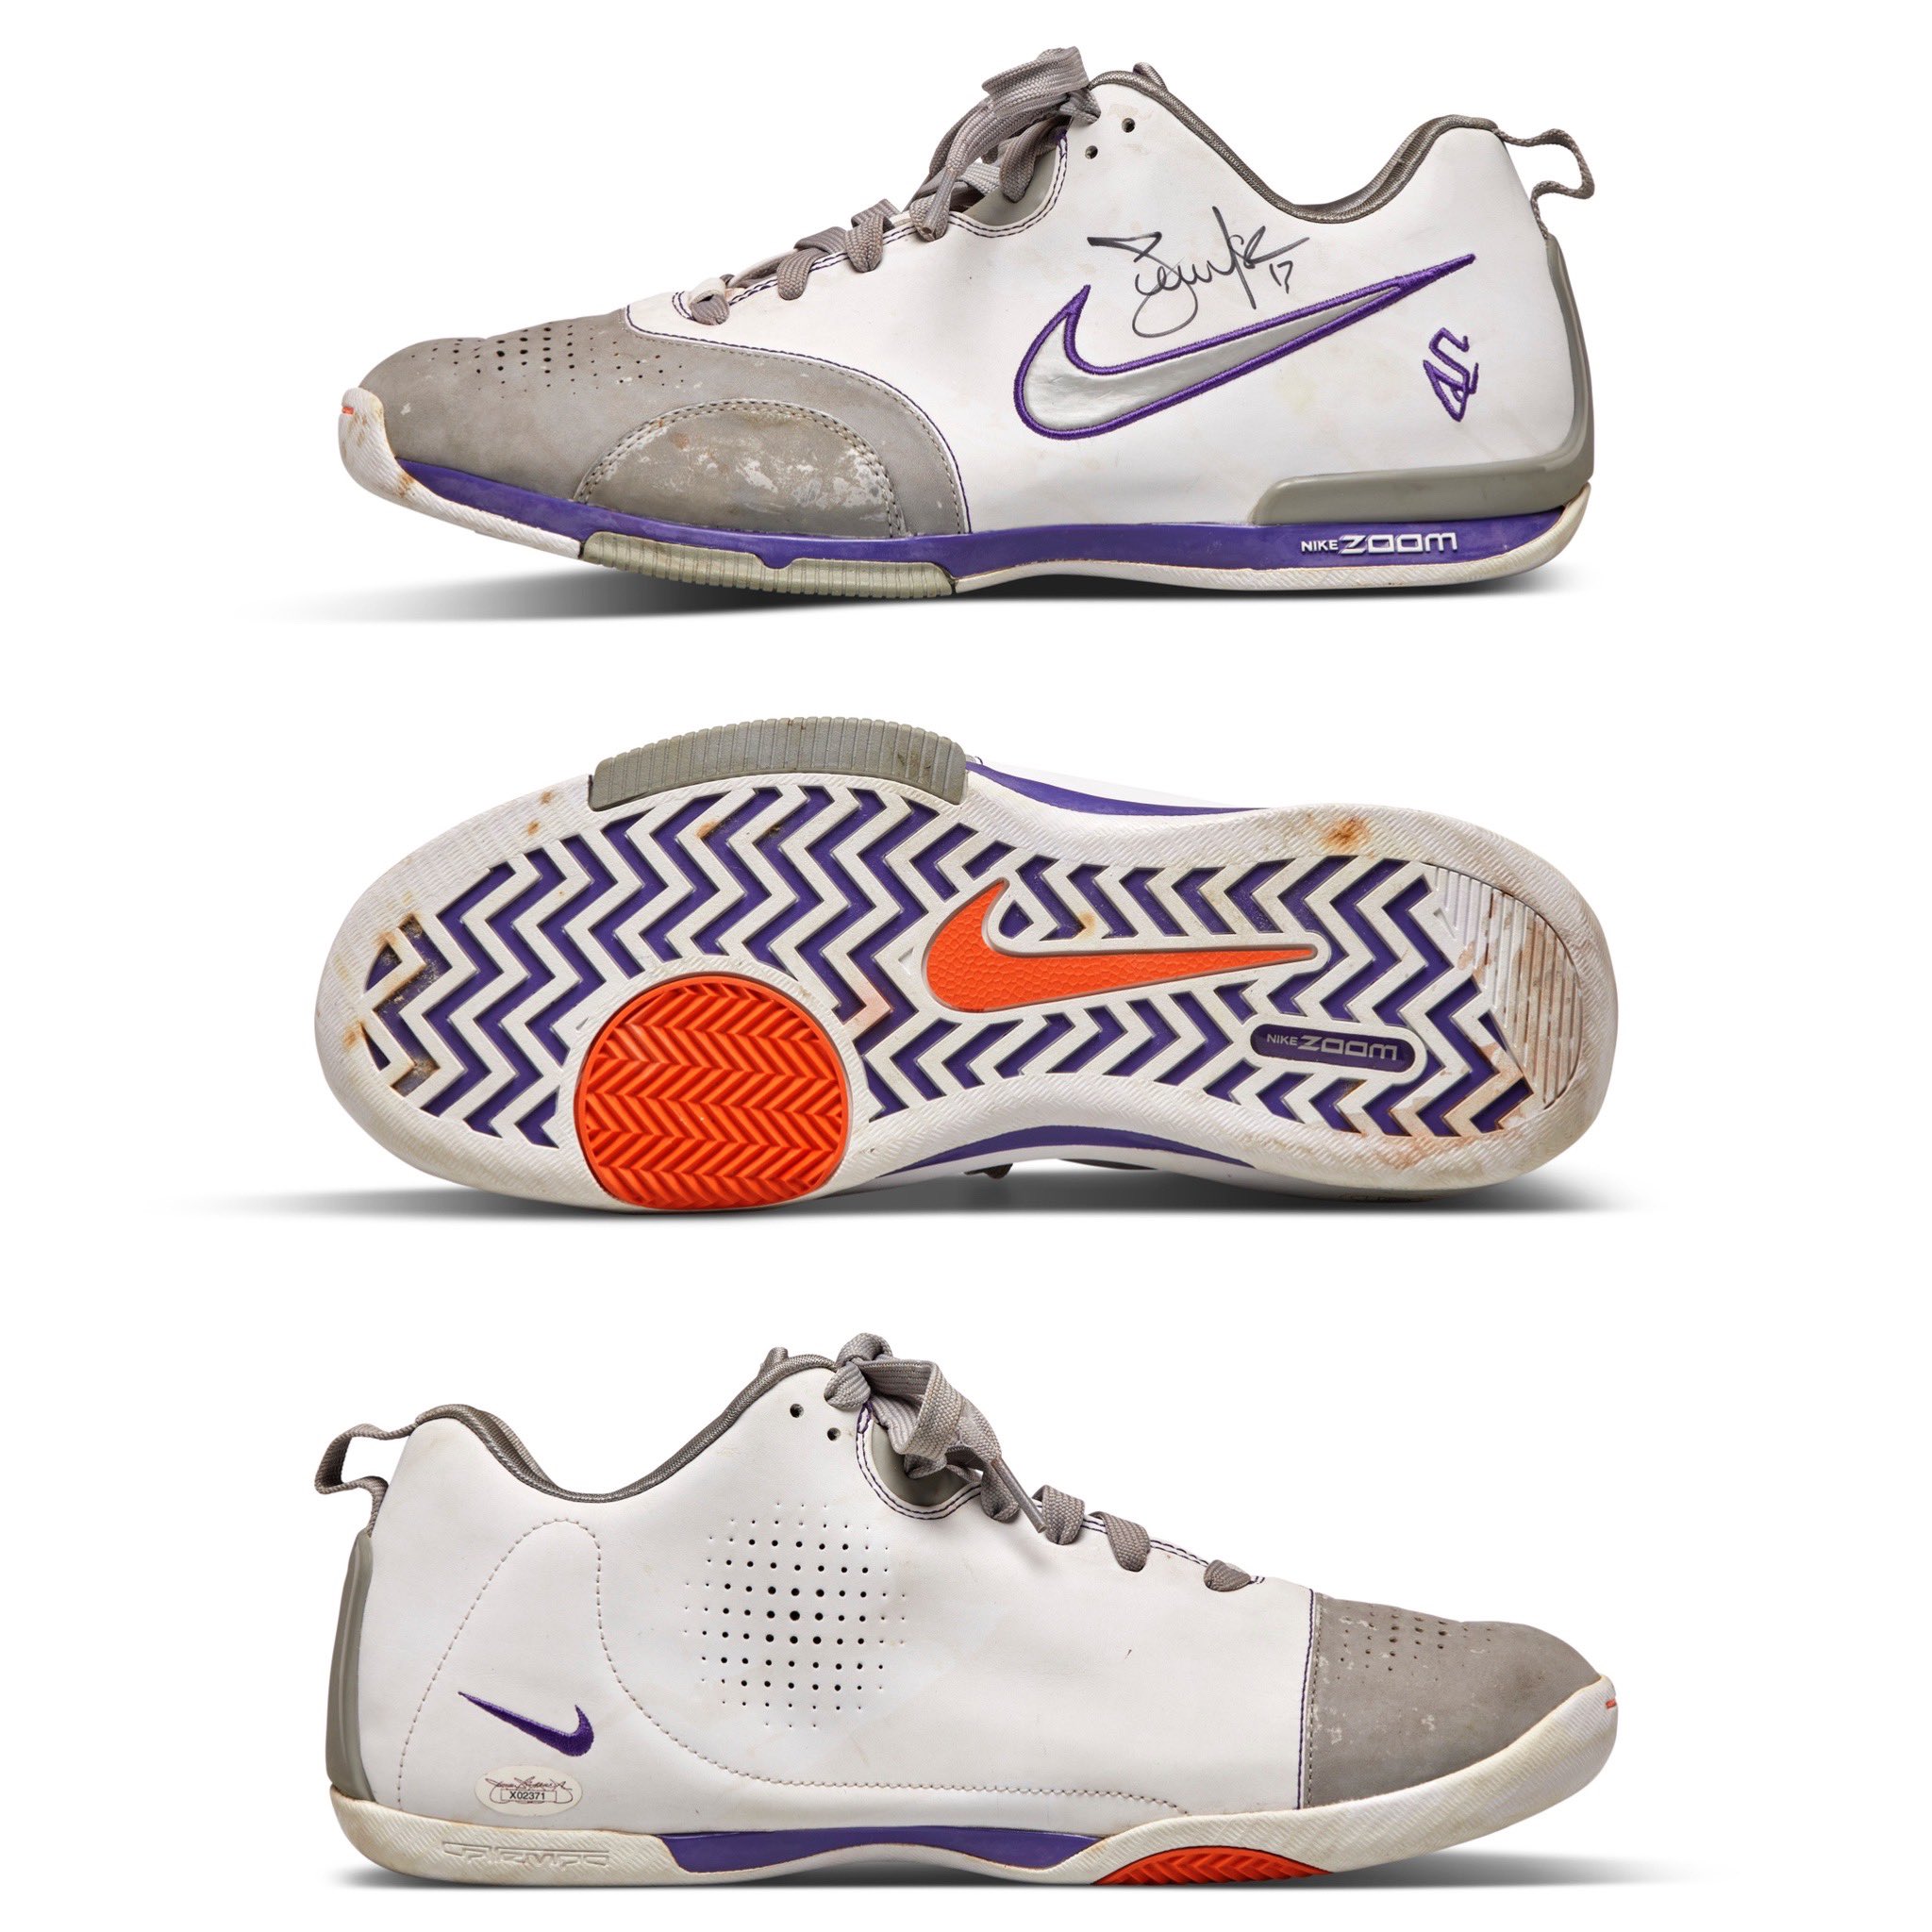 shoezeum on X: Steve Nash was the MVP of the NBA in 2005 and 2006. In 2007  he wore these Nike Zoom BB Low PEs. Many people credit Kobe Bryant as being